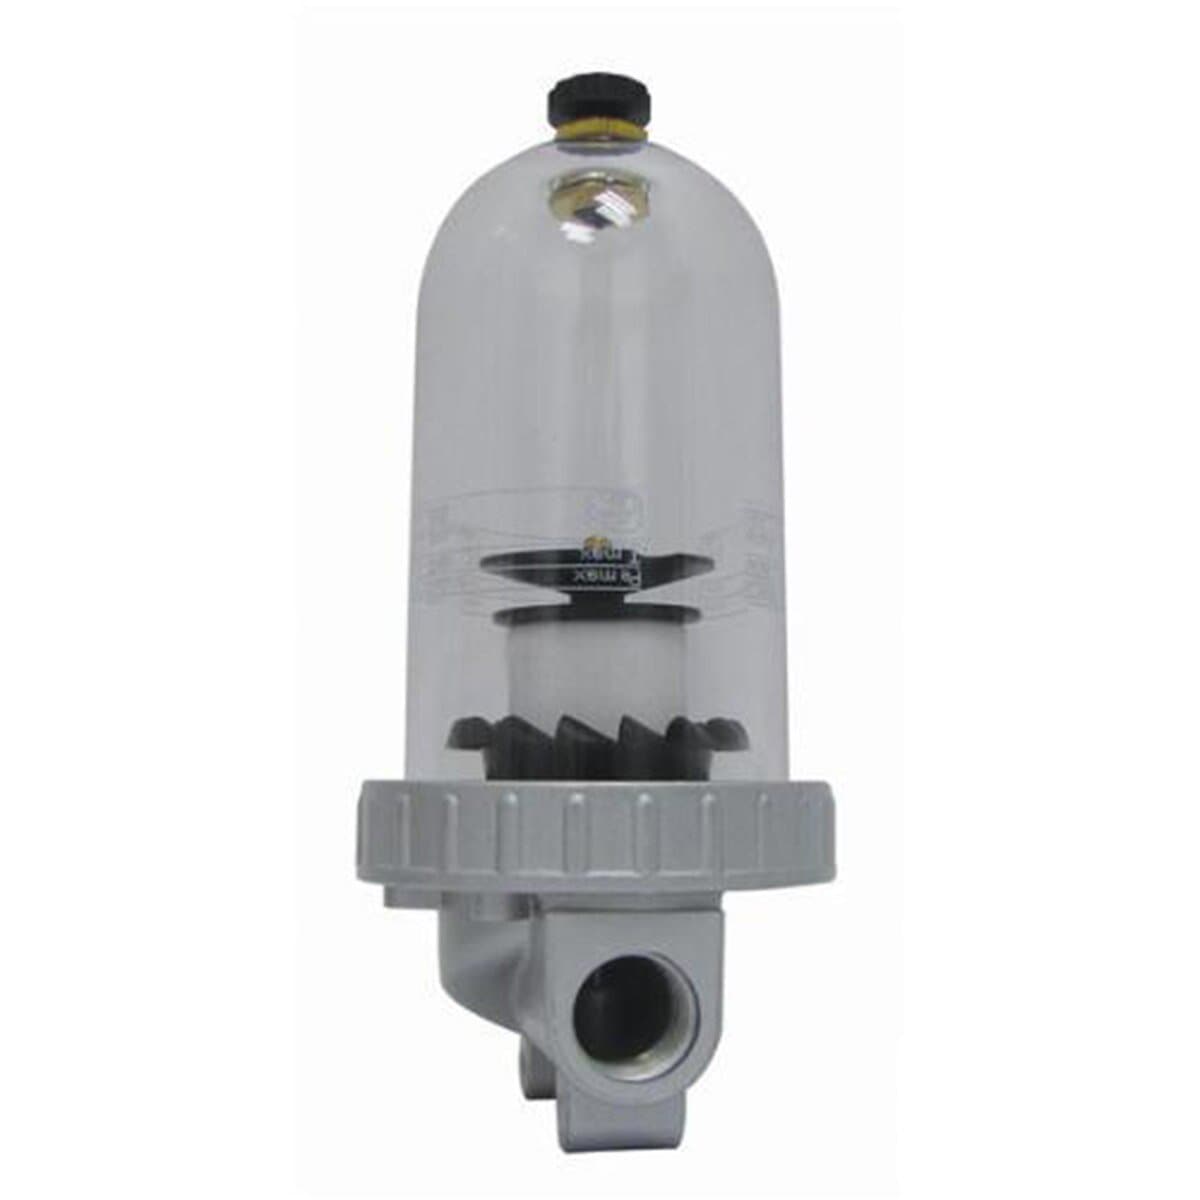 Weha Water Trap for Weha Vacuum Lifters - Weha